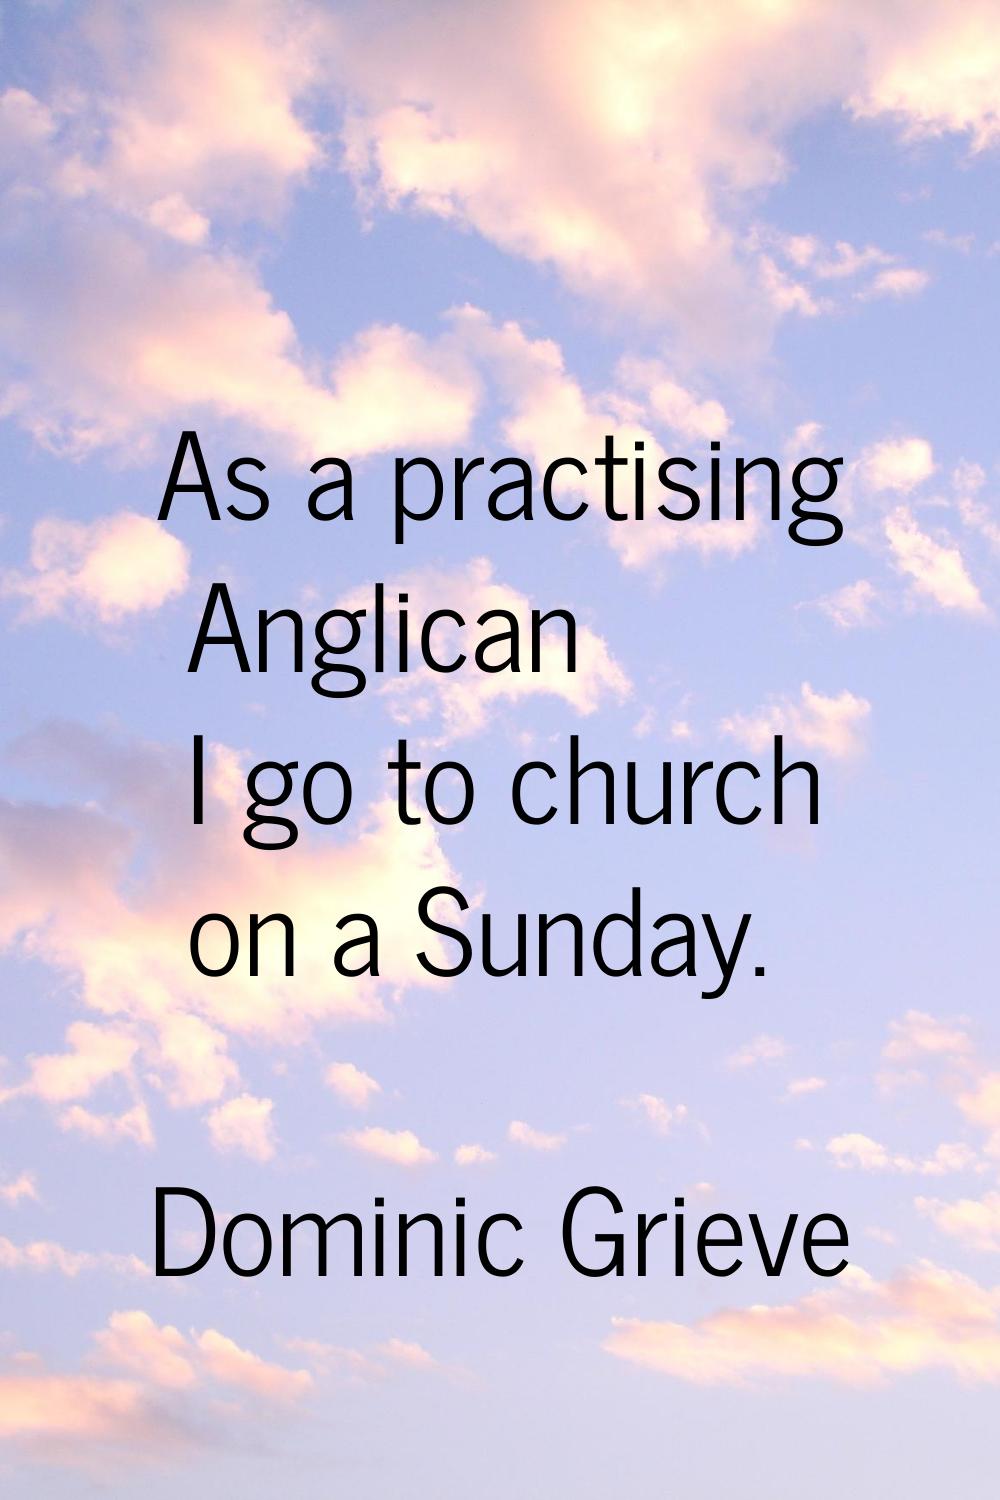 As a practising Anglican I go to church on a Sunday.